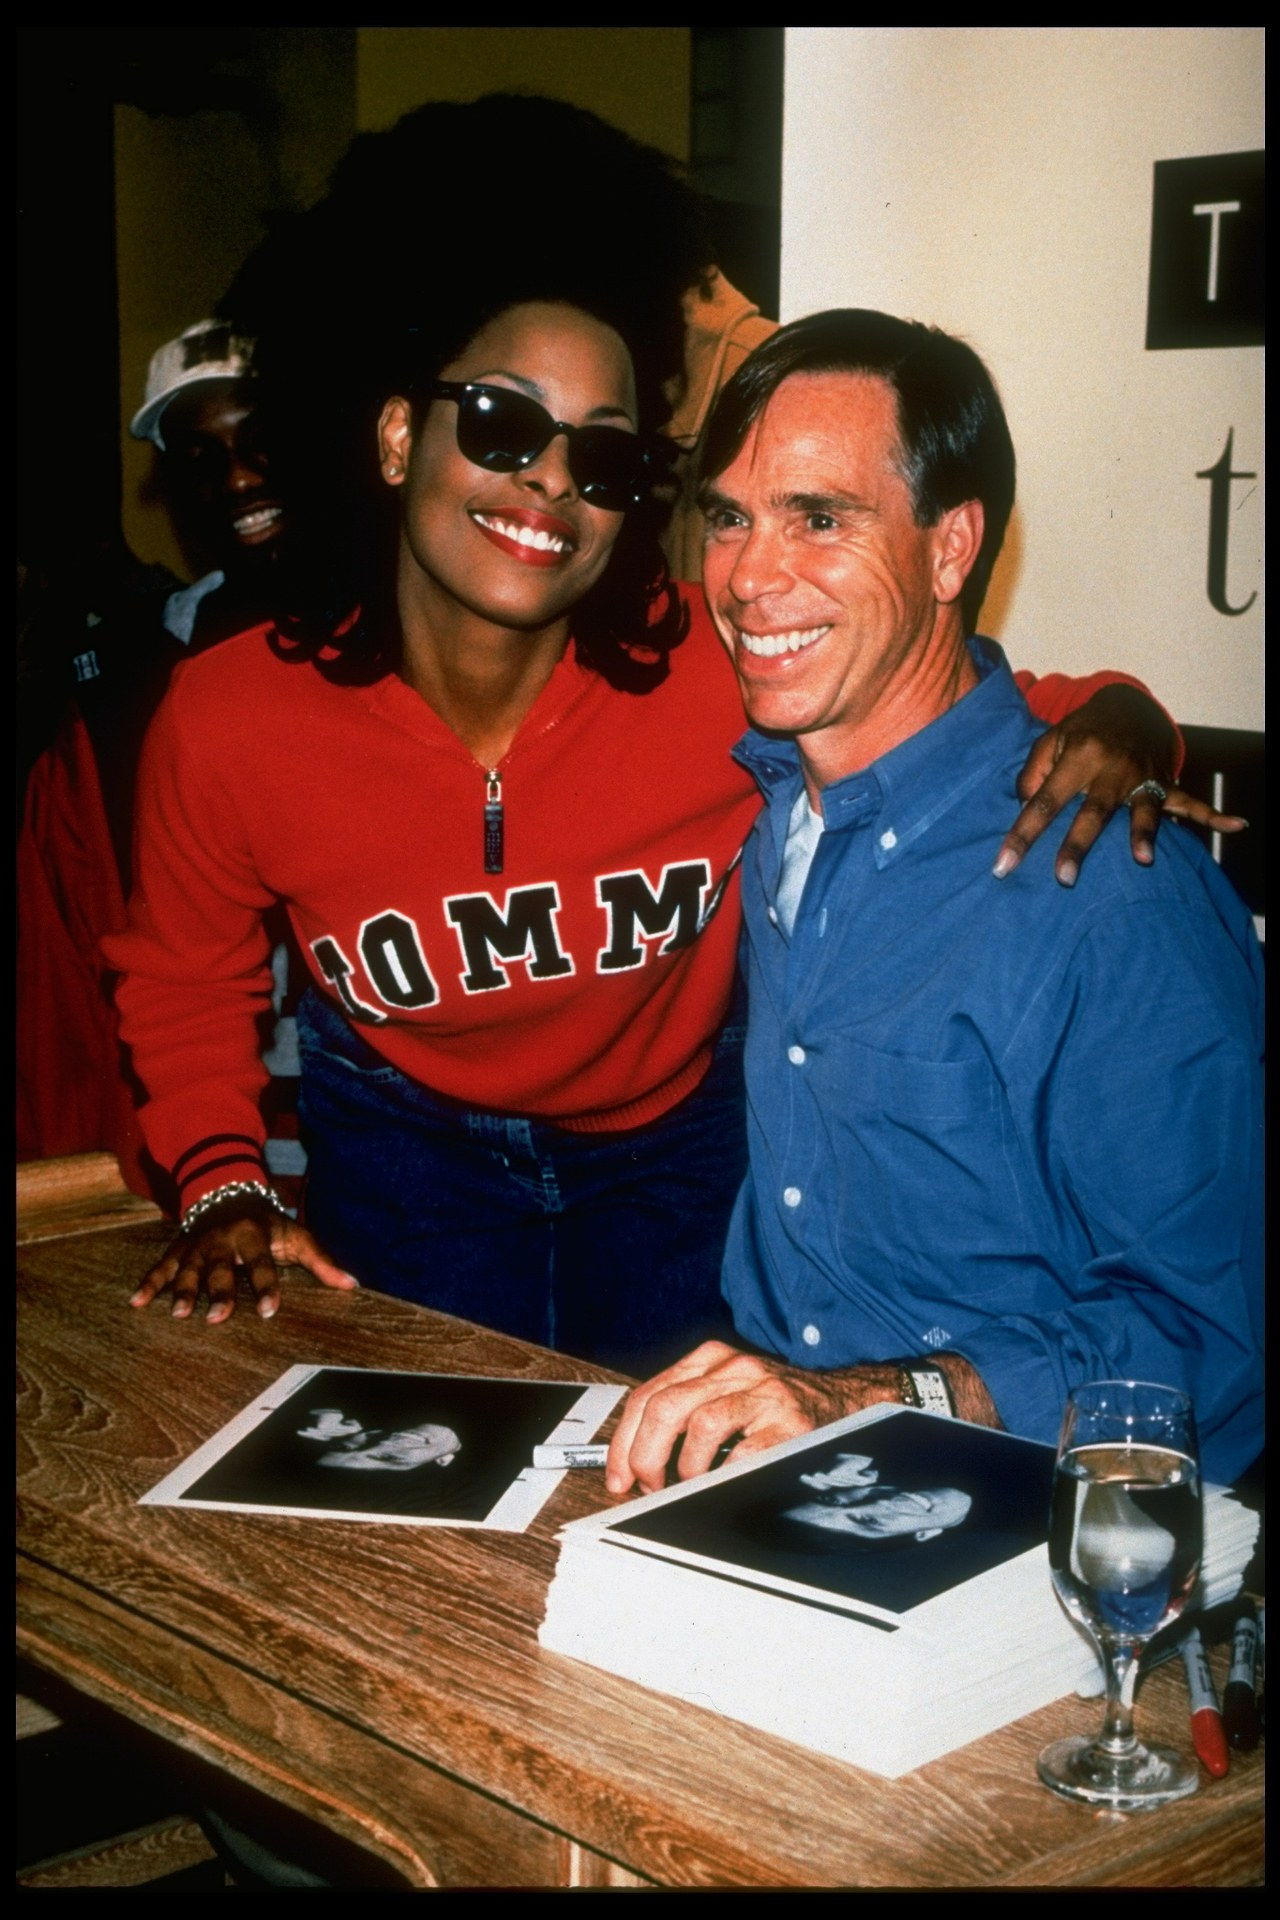 Moda designer Tommy Hilfiger (R) w. rap singer/model Spinerella w. stack of his publicity portraits at autograph party to launch his new women's clothing line called Tommy Girl, at Bloomingdale's dept. store. (Photo by James Keyser/The LIFE Images Collection/Getty Images)